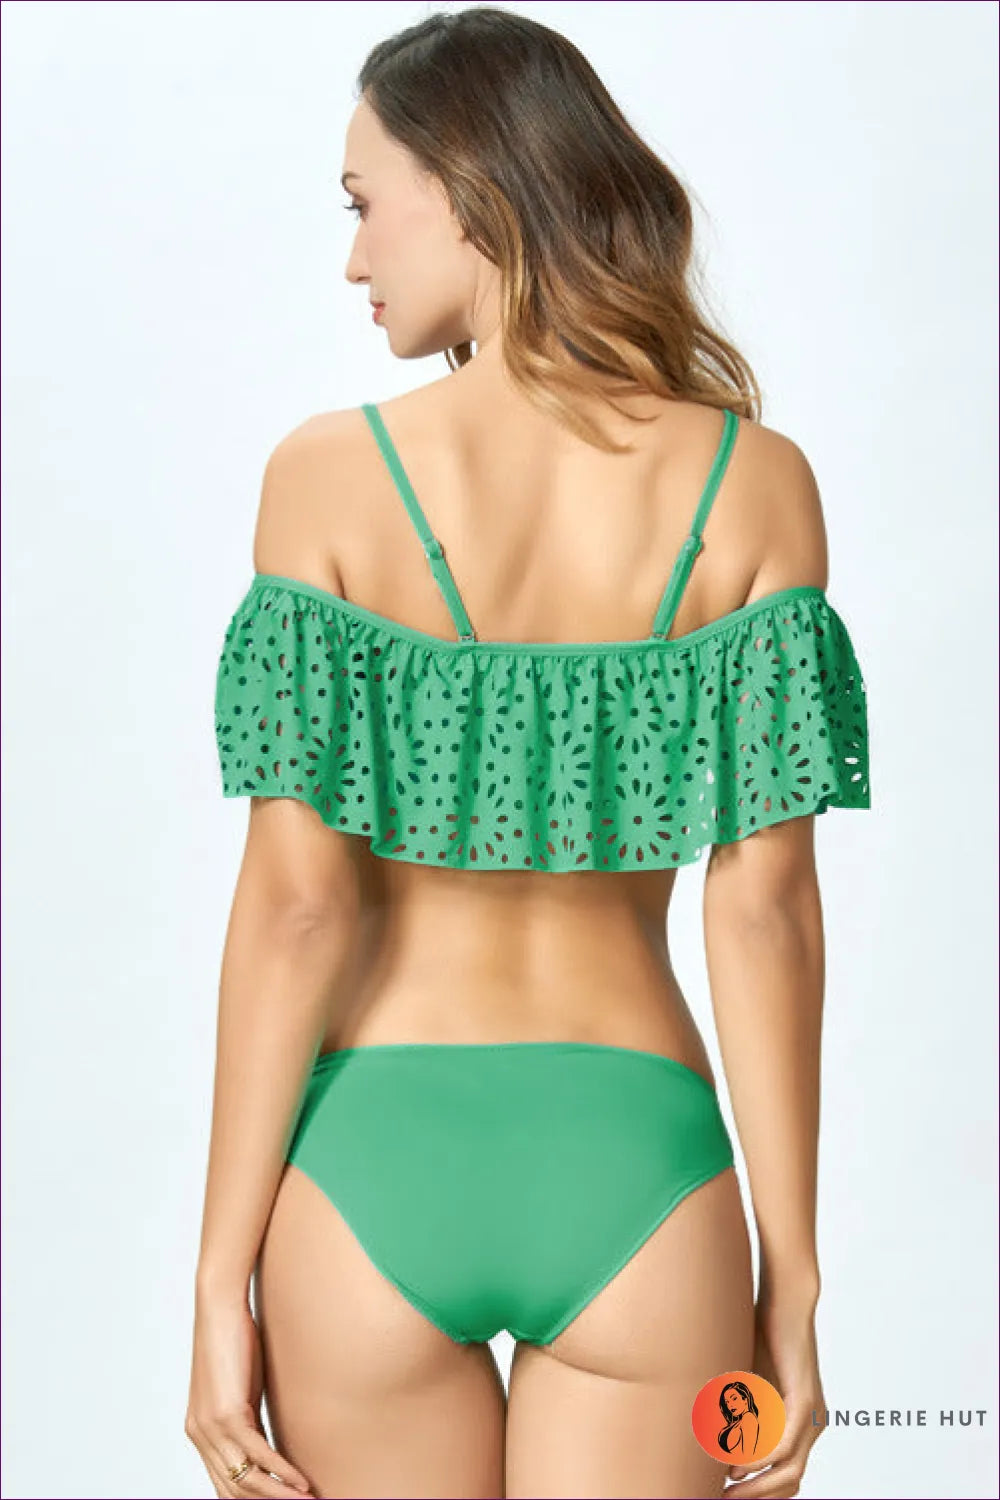 Get Noticed At The Beach In This Smart Sexy Push-up Bikini. Features High-cut Bottoms, Adjustable Straps,